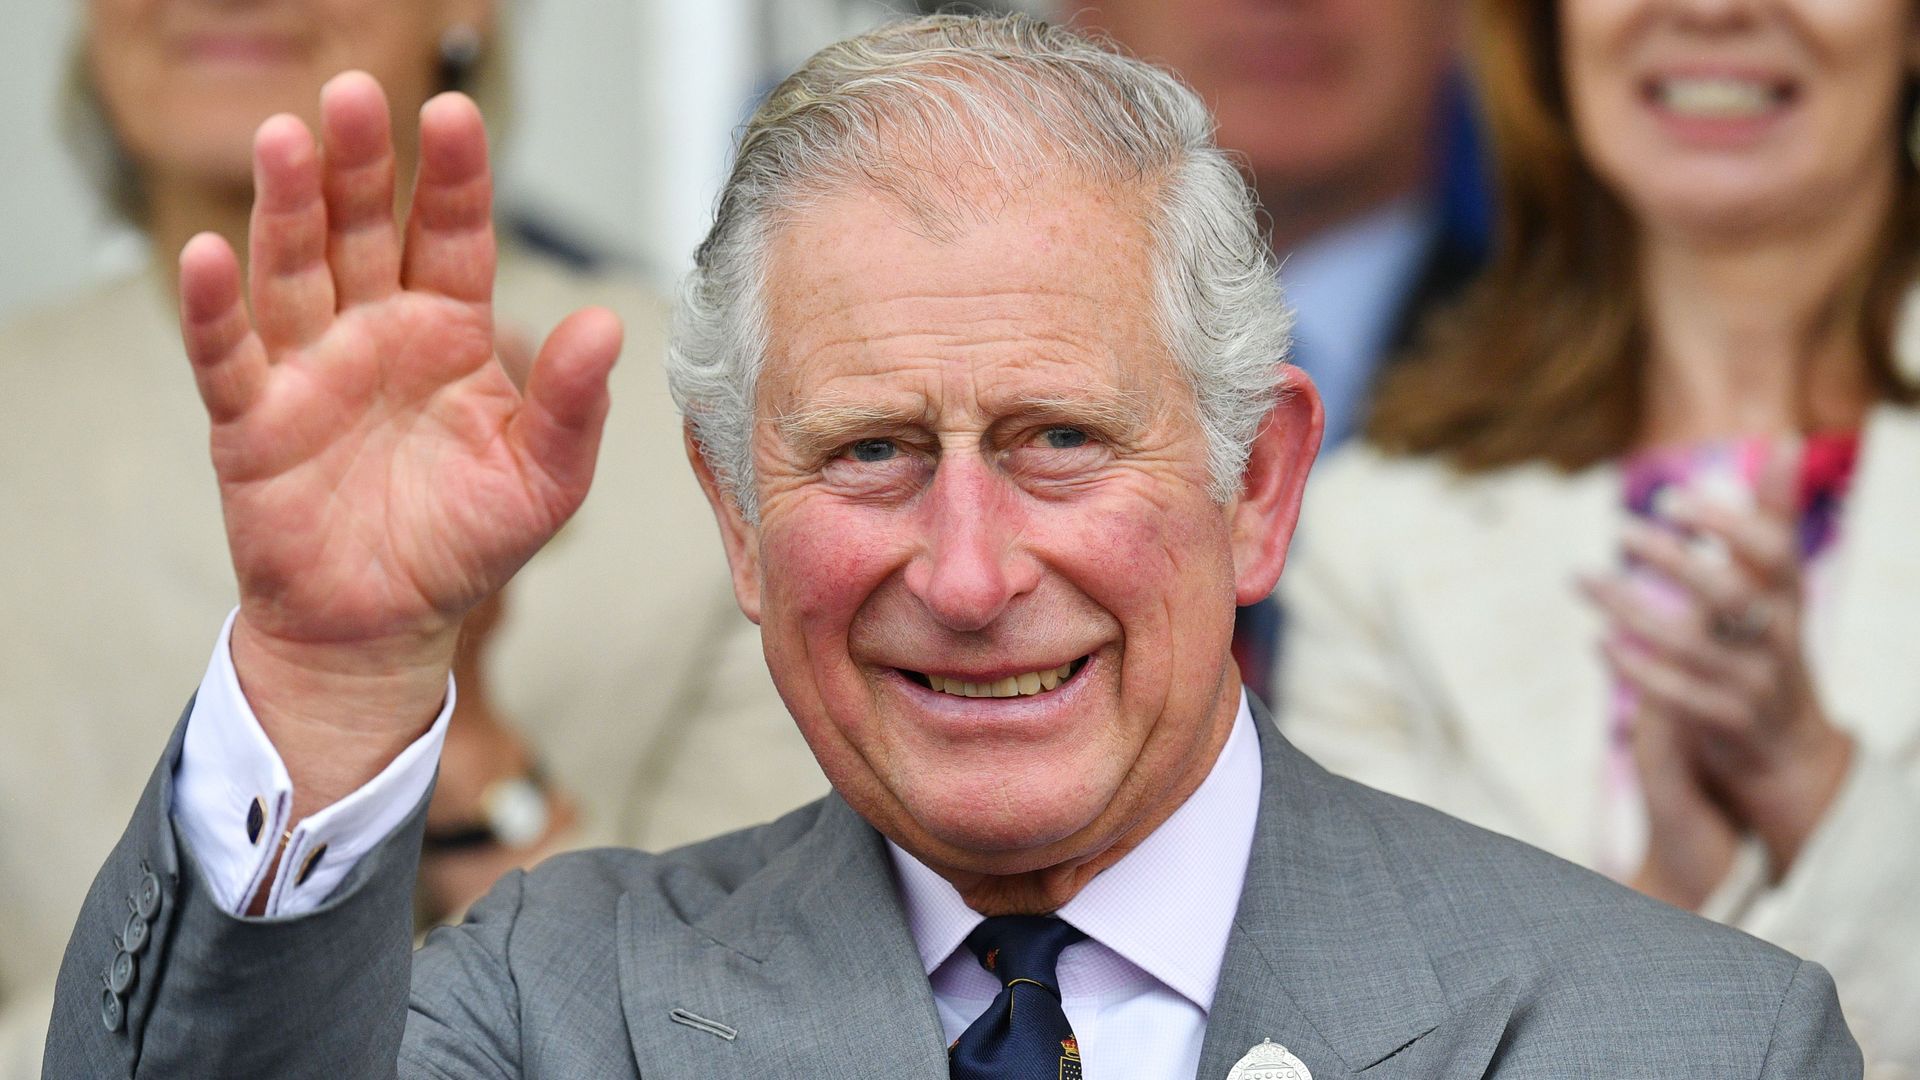 King Charles waves as he attends the Royal Cornwall Show in 2018